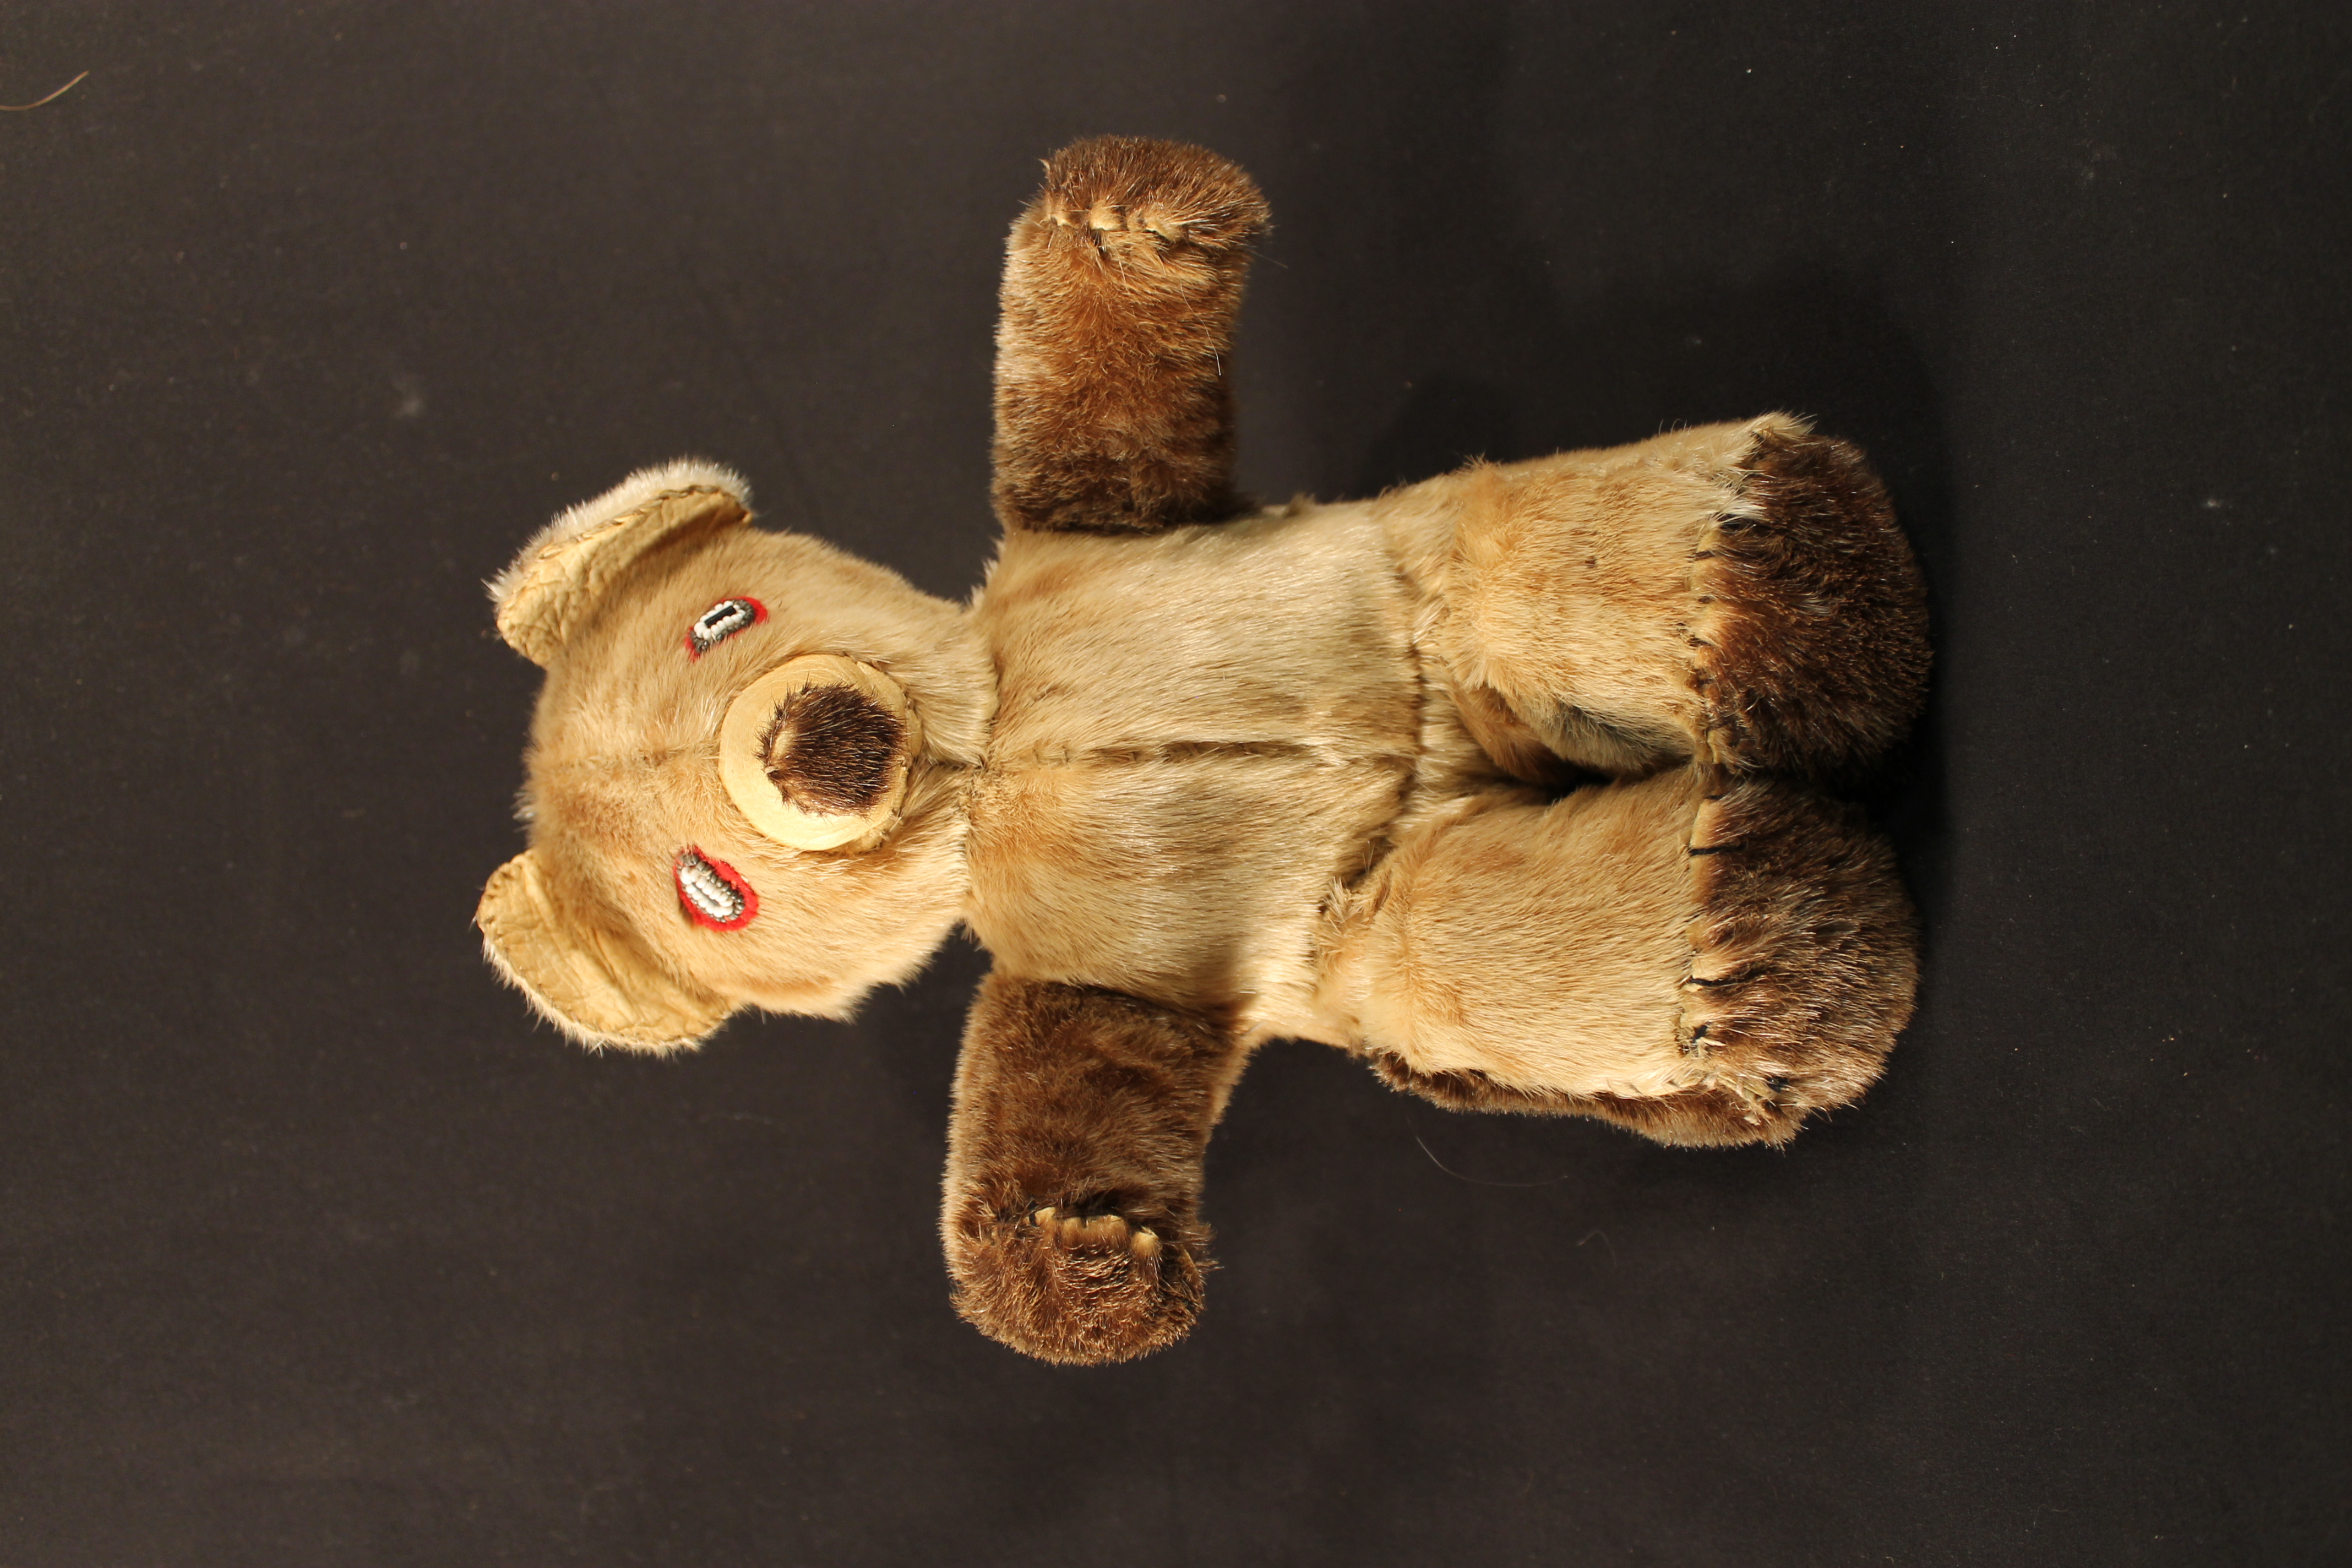 Teddy bear made of fur that is both sandy and chestnut brown. It has a fur body with eyes made of red felt with black, white, and gray beading.